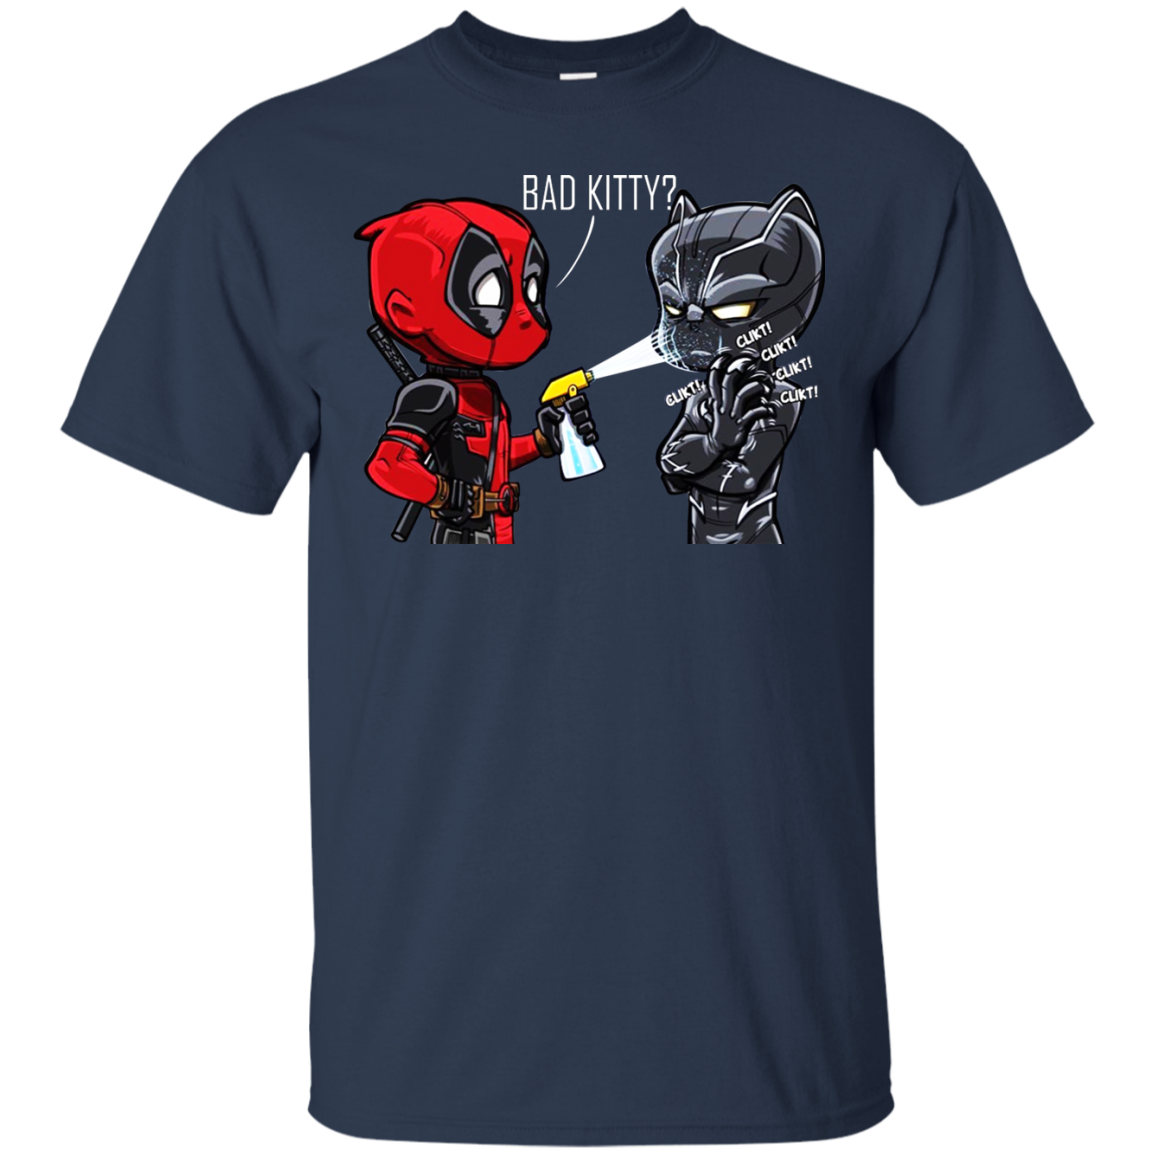 Deadpool And Black Panther - Bad Kitty Shirt, Hoodie, Tank | AllBlueTees